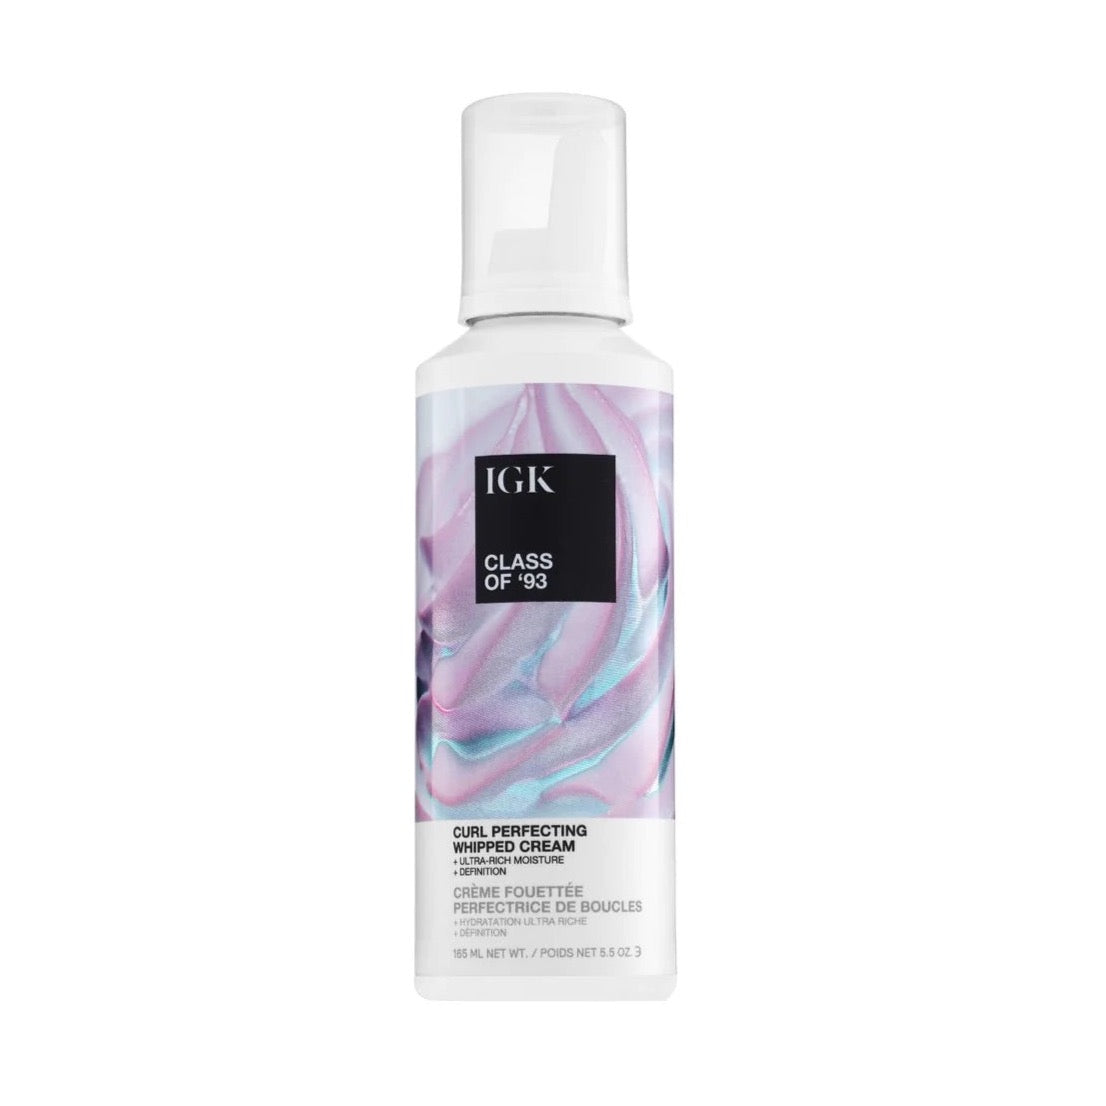 IGK Class of '93 Curl Perfecting Whipped Cream Ultra Rich Moisture, Definition